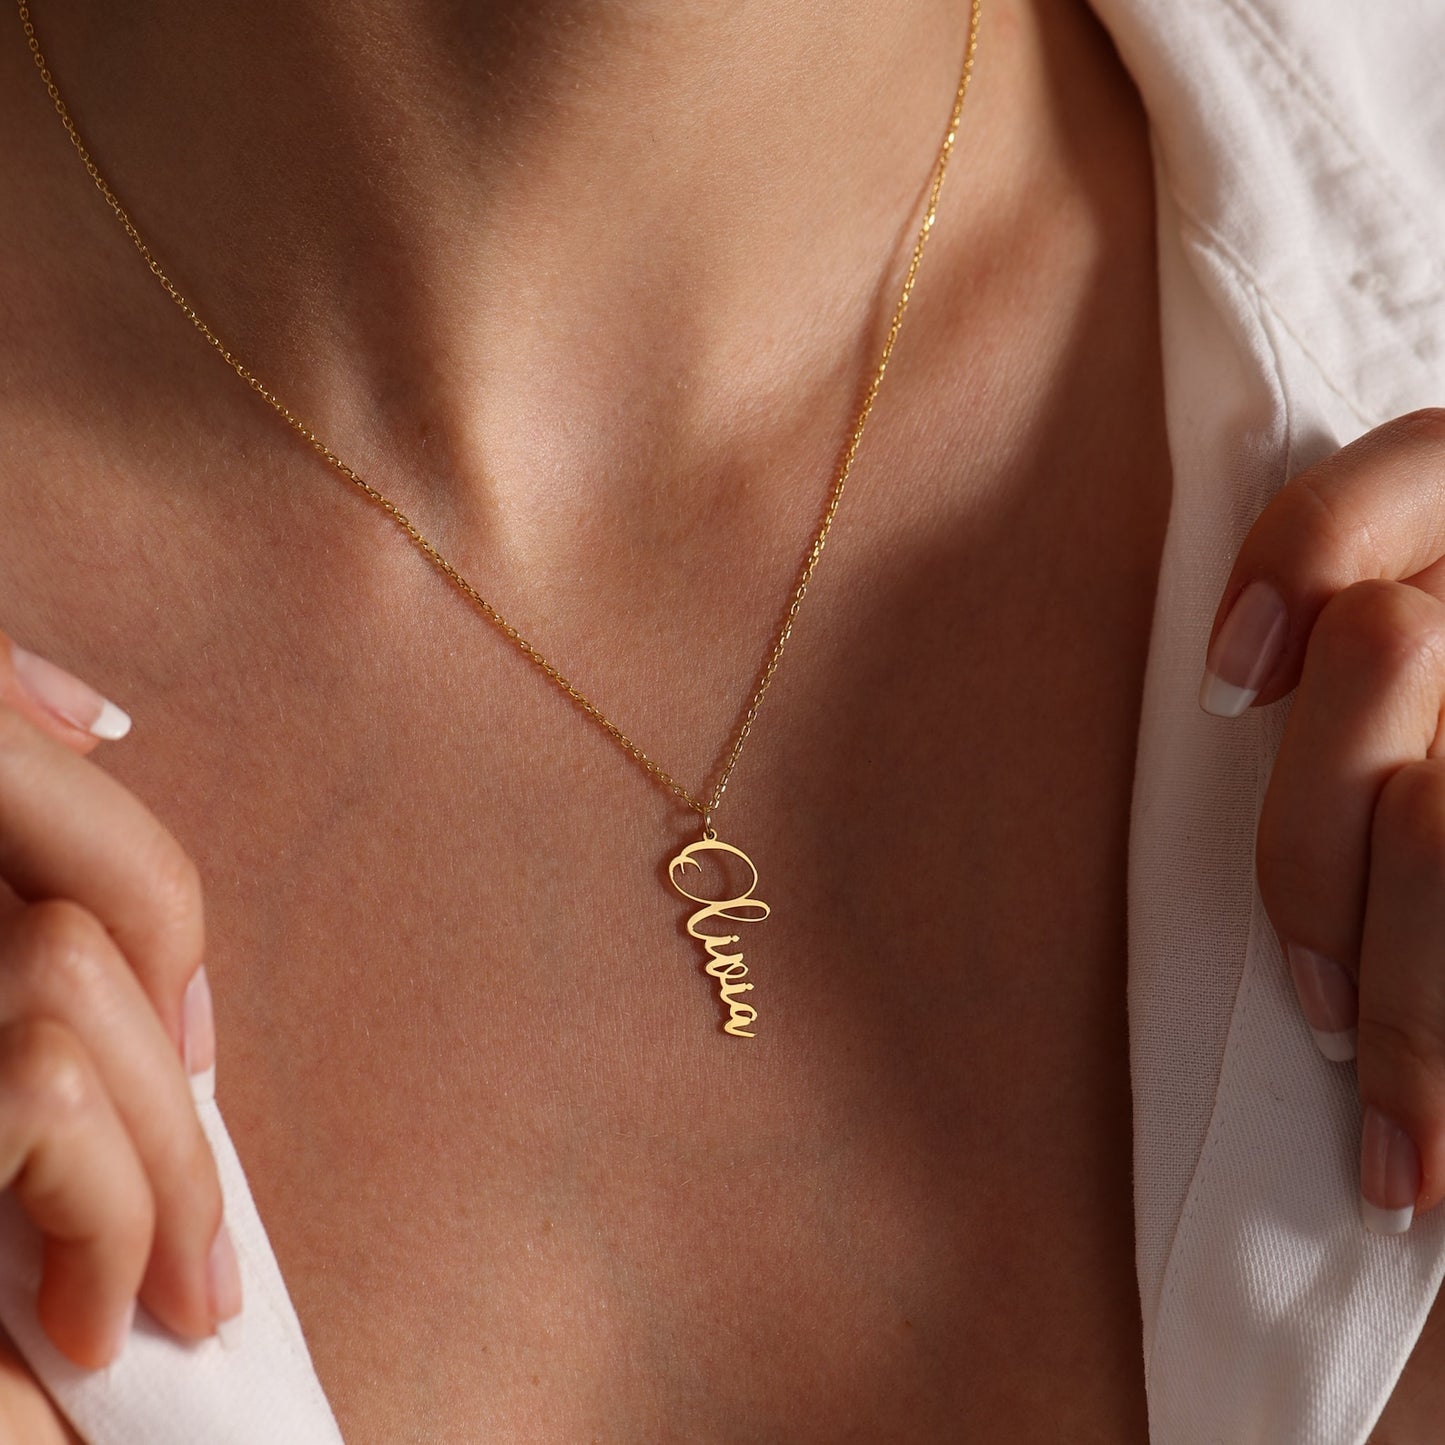 Vertical Style Name Necklace